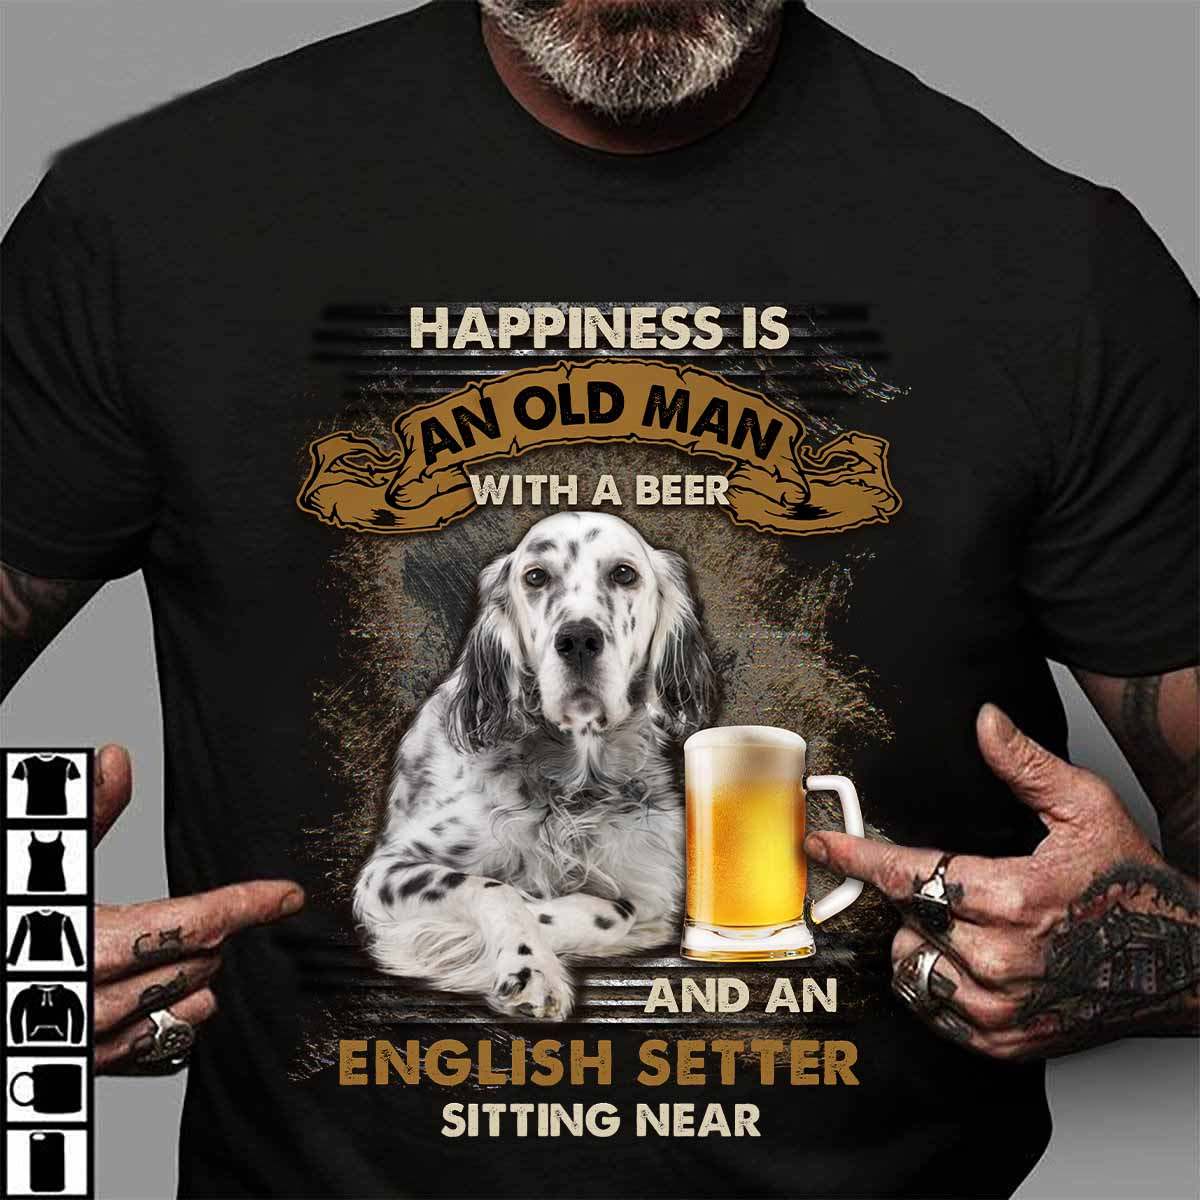 Happiness is an old man with a beer and a English Setter sitting near - English Setter